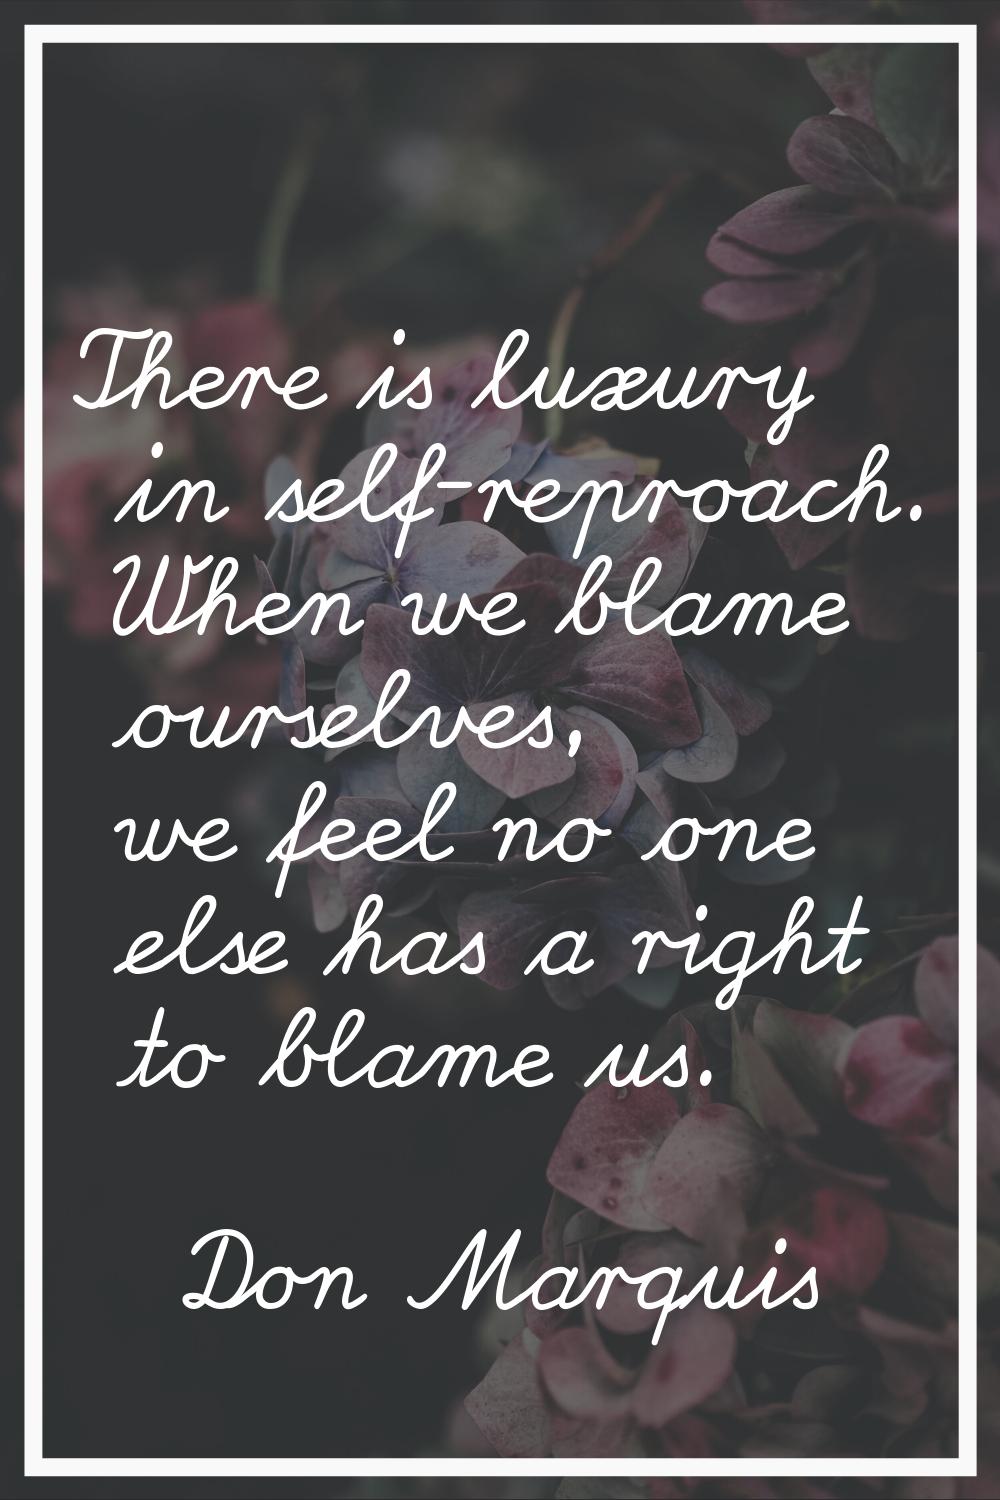 There is luxury in self-reproach. When we blame ourselves, we feel no one else has a right to blame